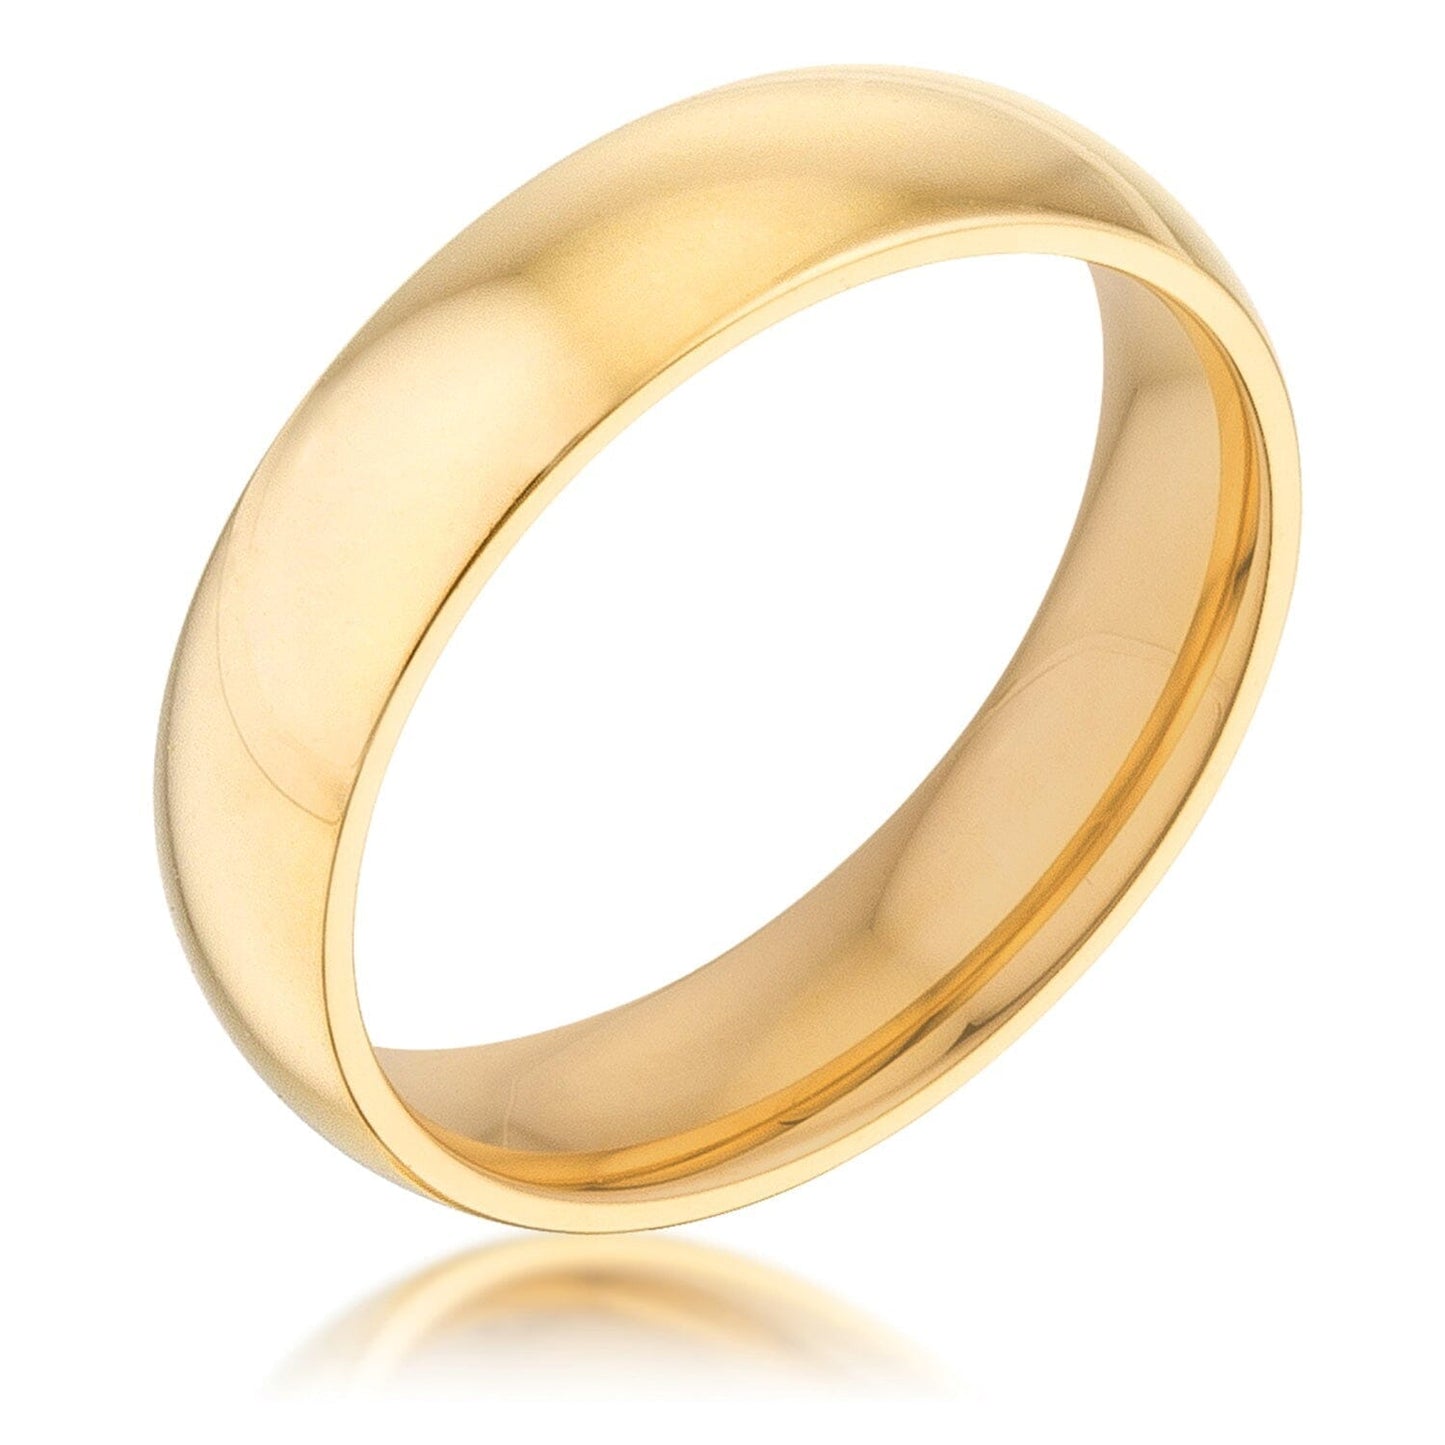 5 mm IPG Gold Stainless Steel Band Rings Das Juwel 